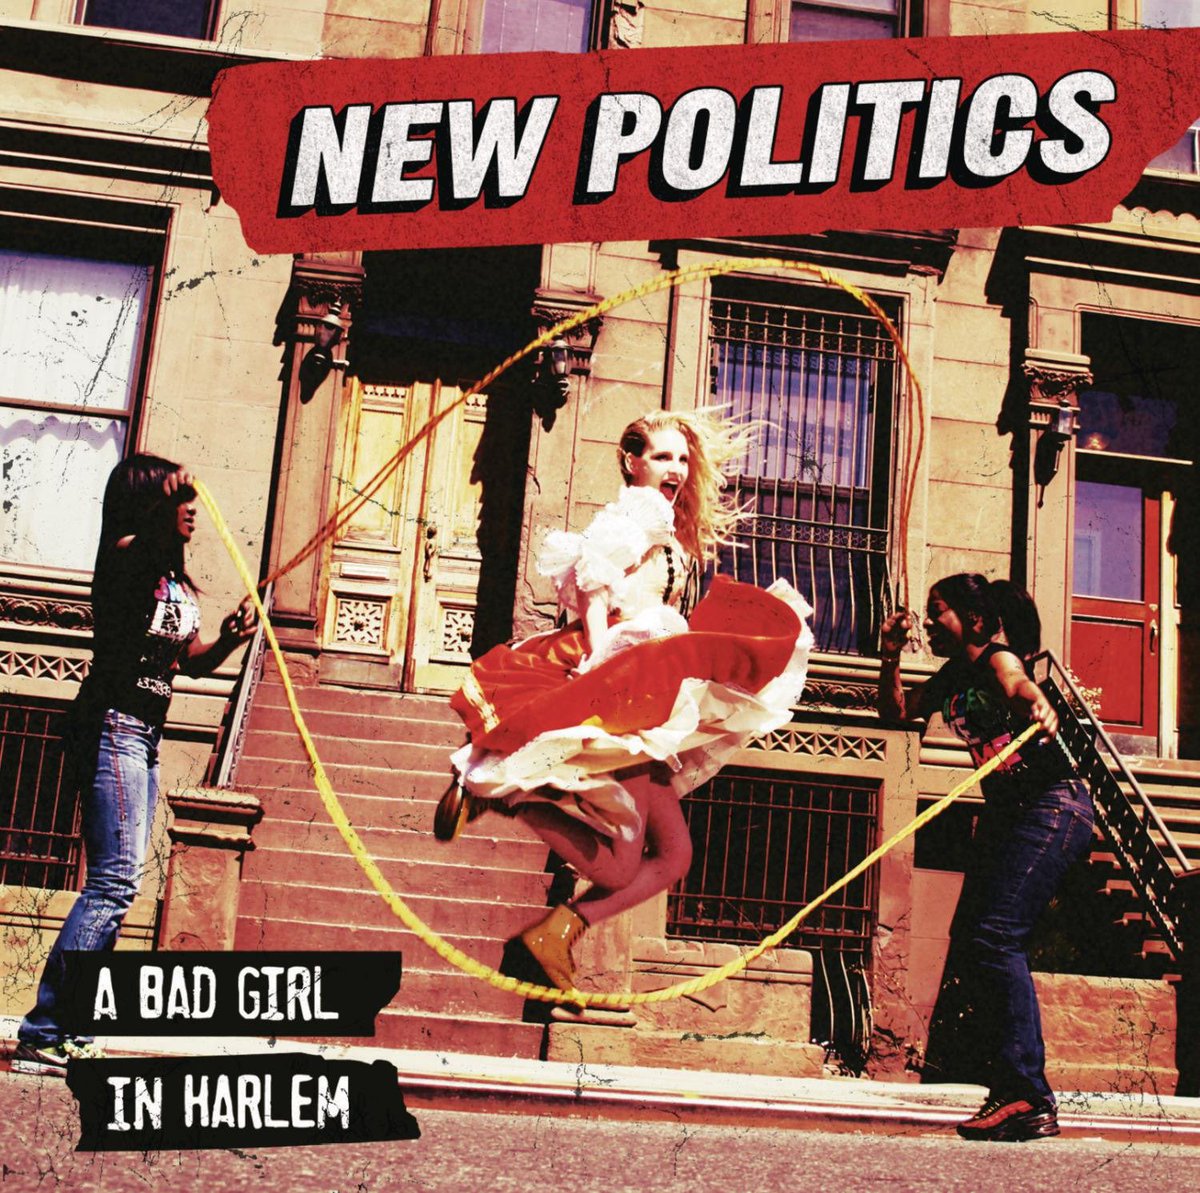 - New Politics!641k monthly listeners!they’re a trio alt band that is know for Harlem (that one haikyuu edit)5 albums: New Politics, A Bad Girl in Harlem, Vikings, Lost in Translation, & Invitations to an Alternate Realitymy favorite song: Harlem and Pretend We’re in a Movie